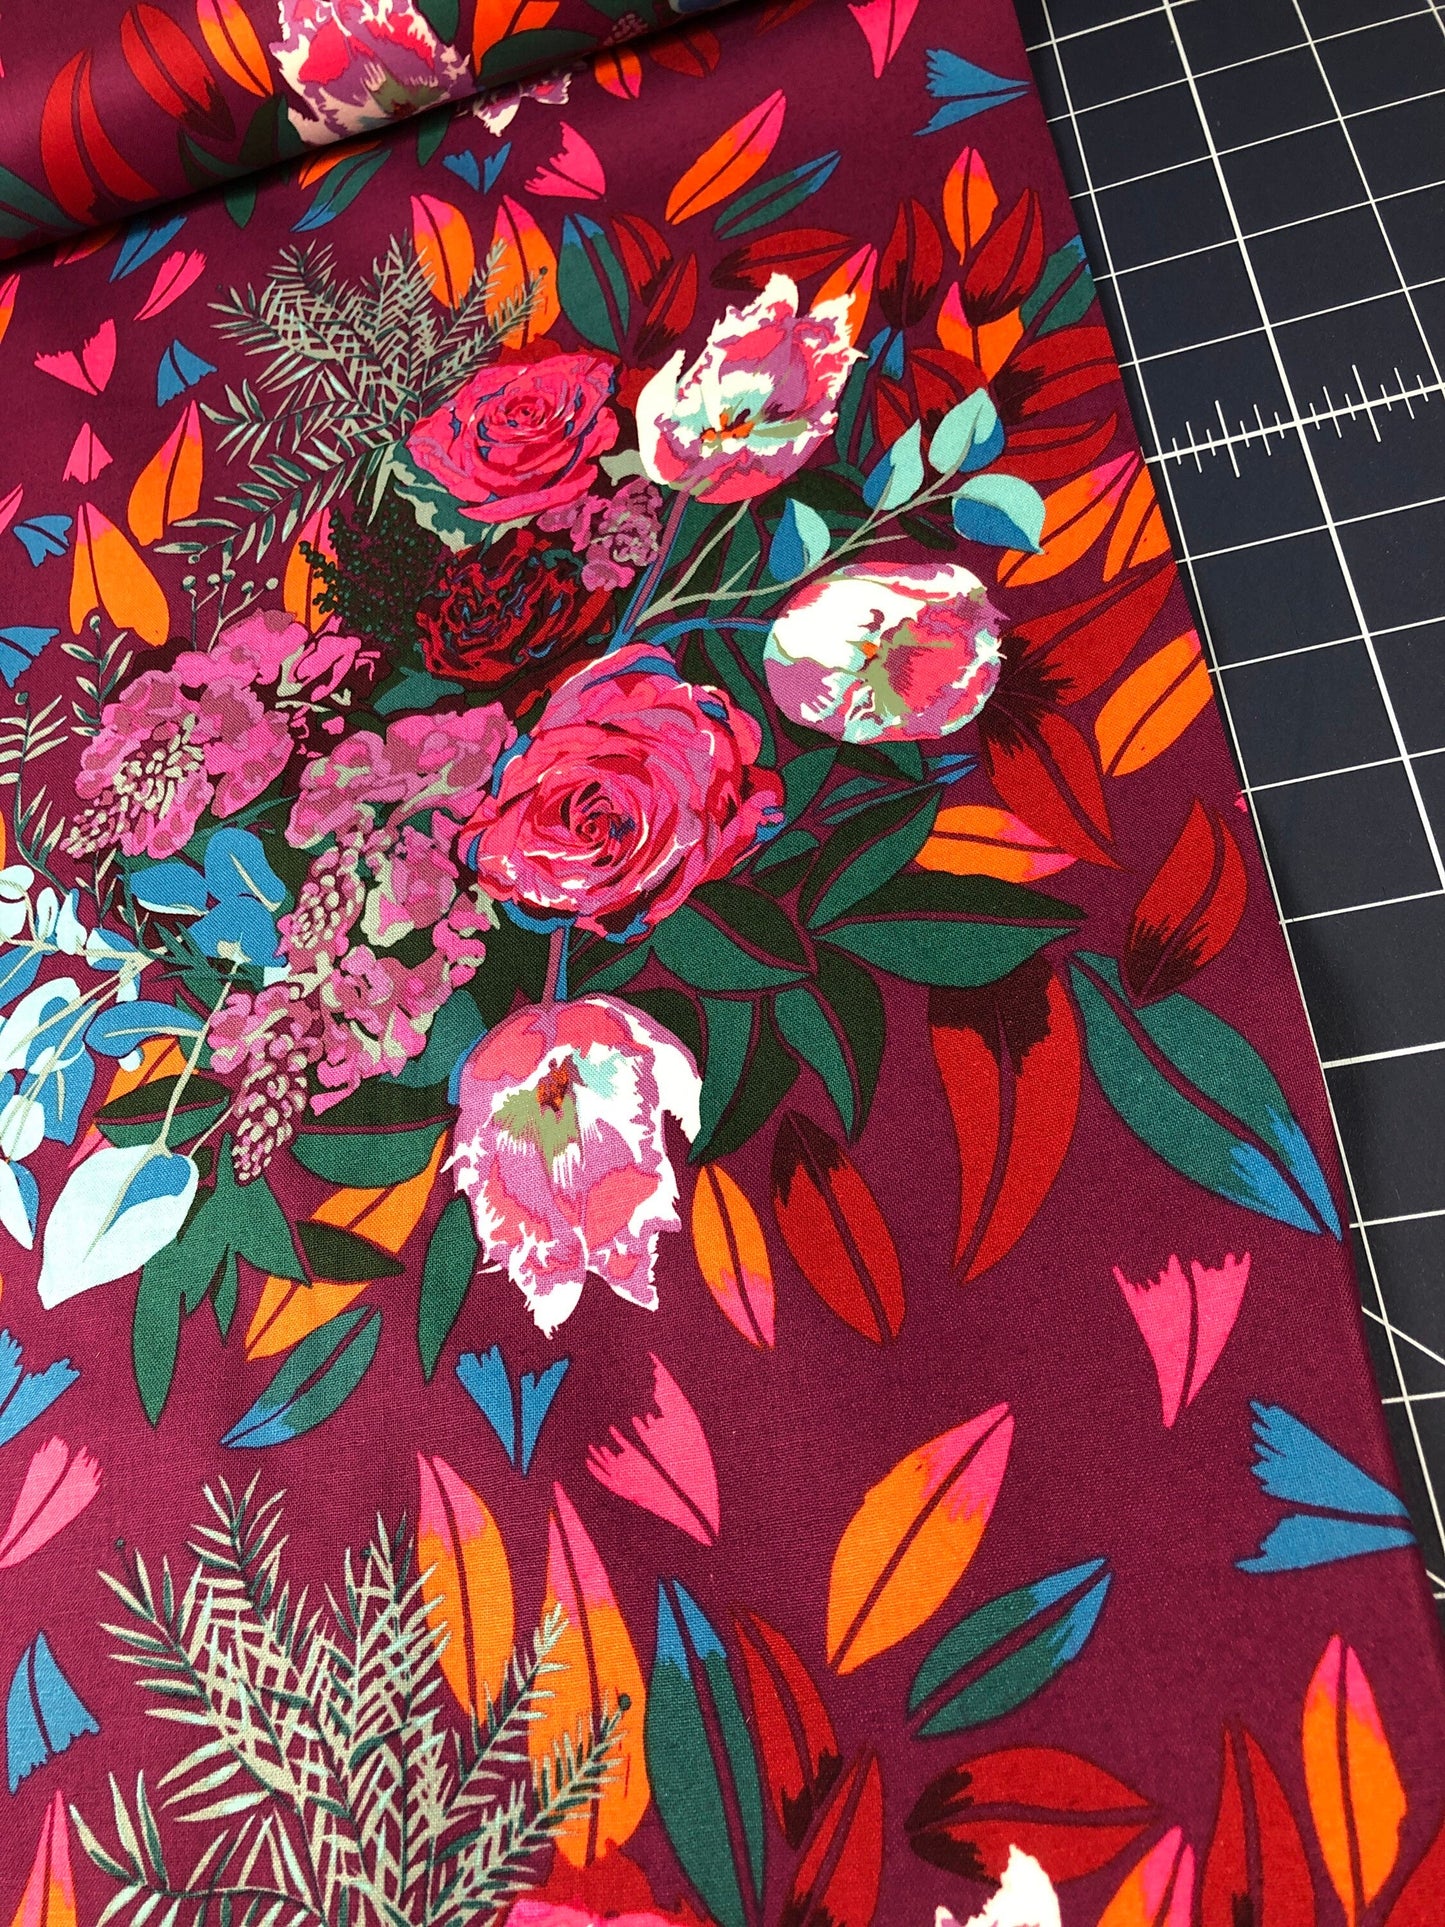 Made My Day NEW FLAME SWEETLY Pwah167 Anna Maria Horner, Free Spirit Fabrics, Quilt Fabric, Floral Fabric, Cotton Fabric, Fabric By The Yard